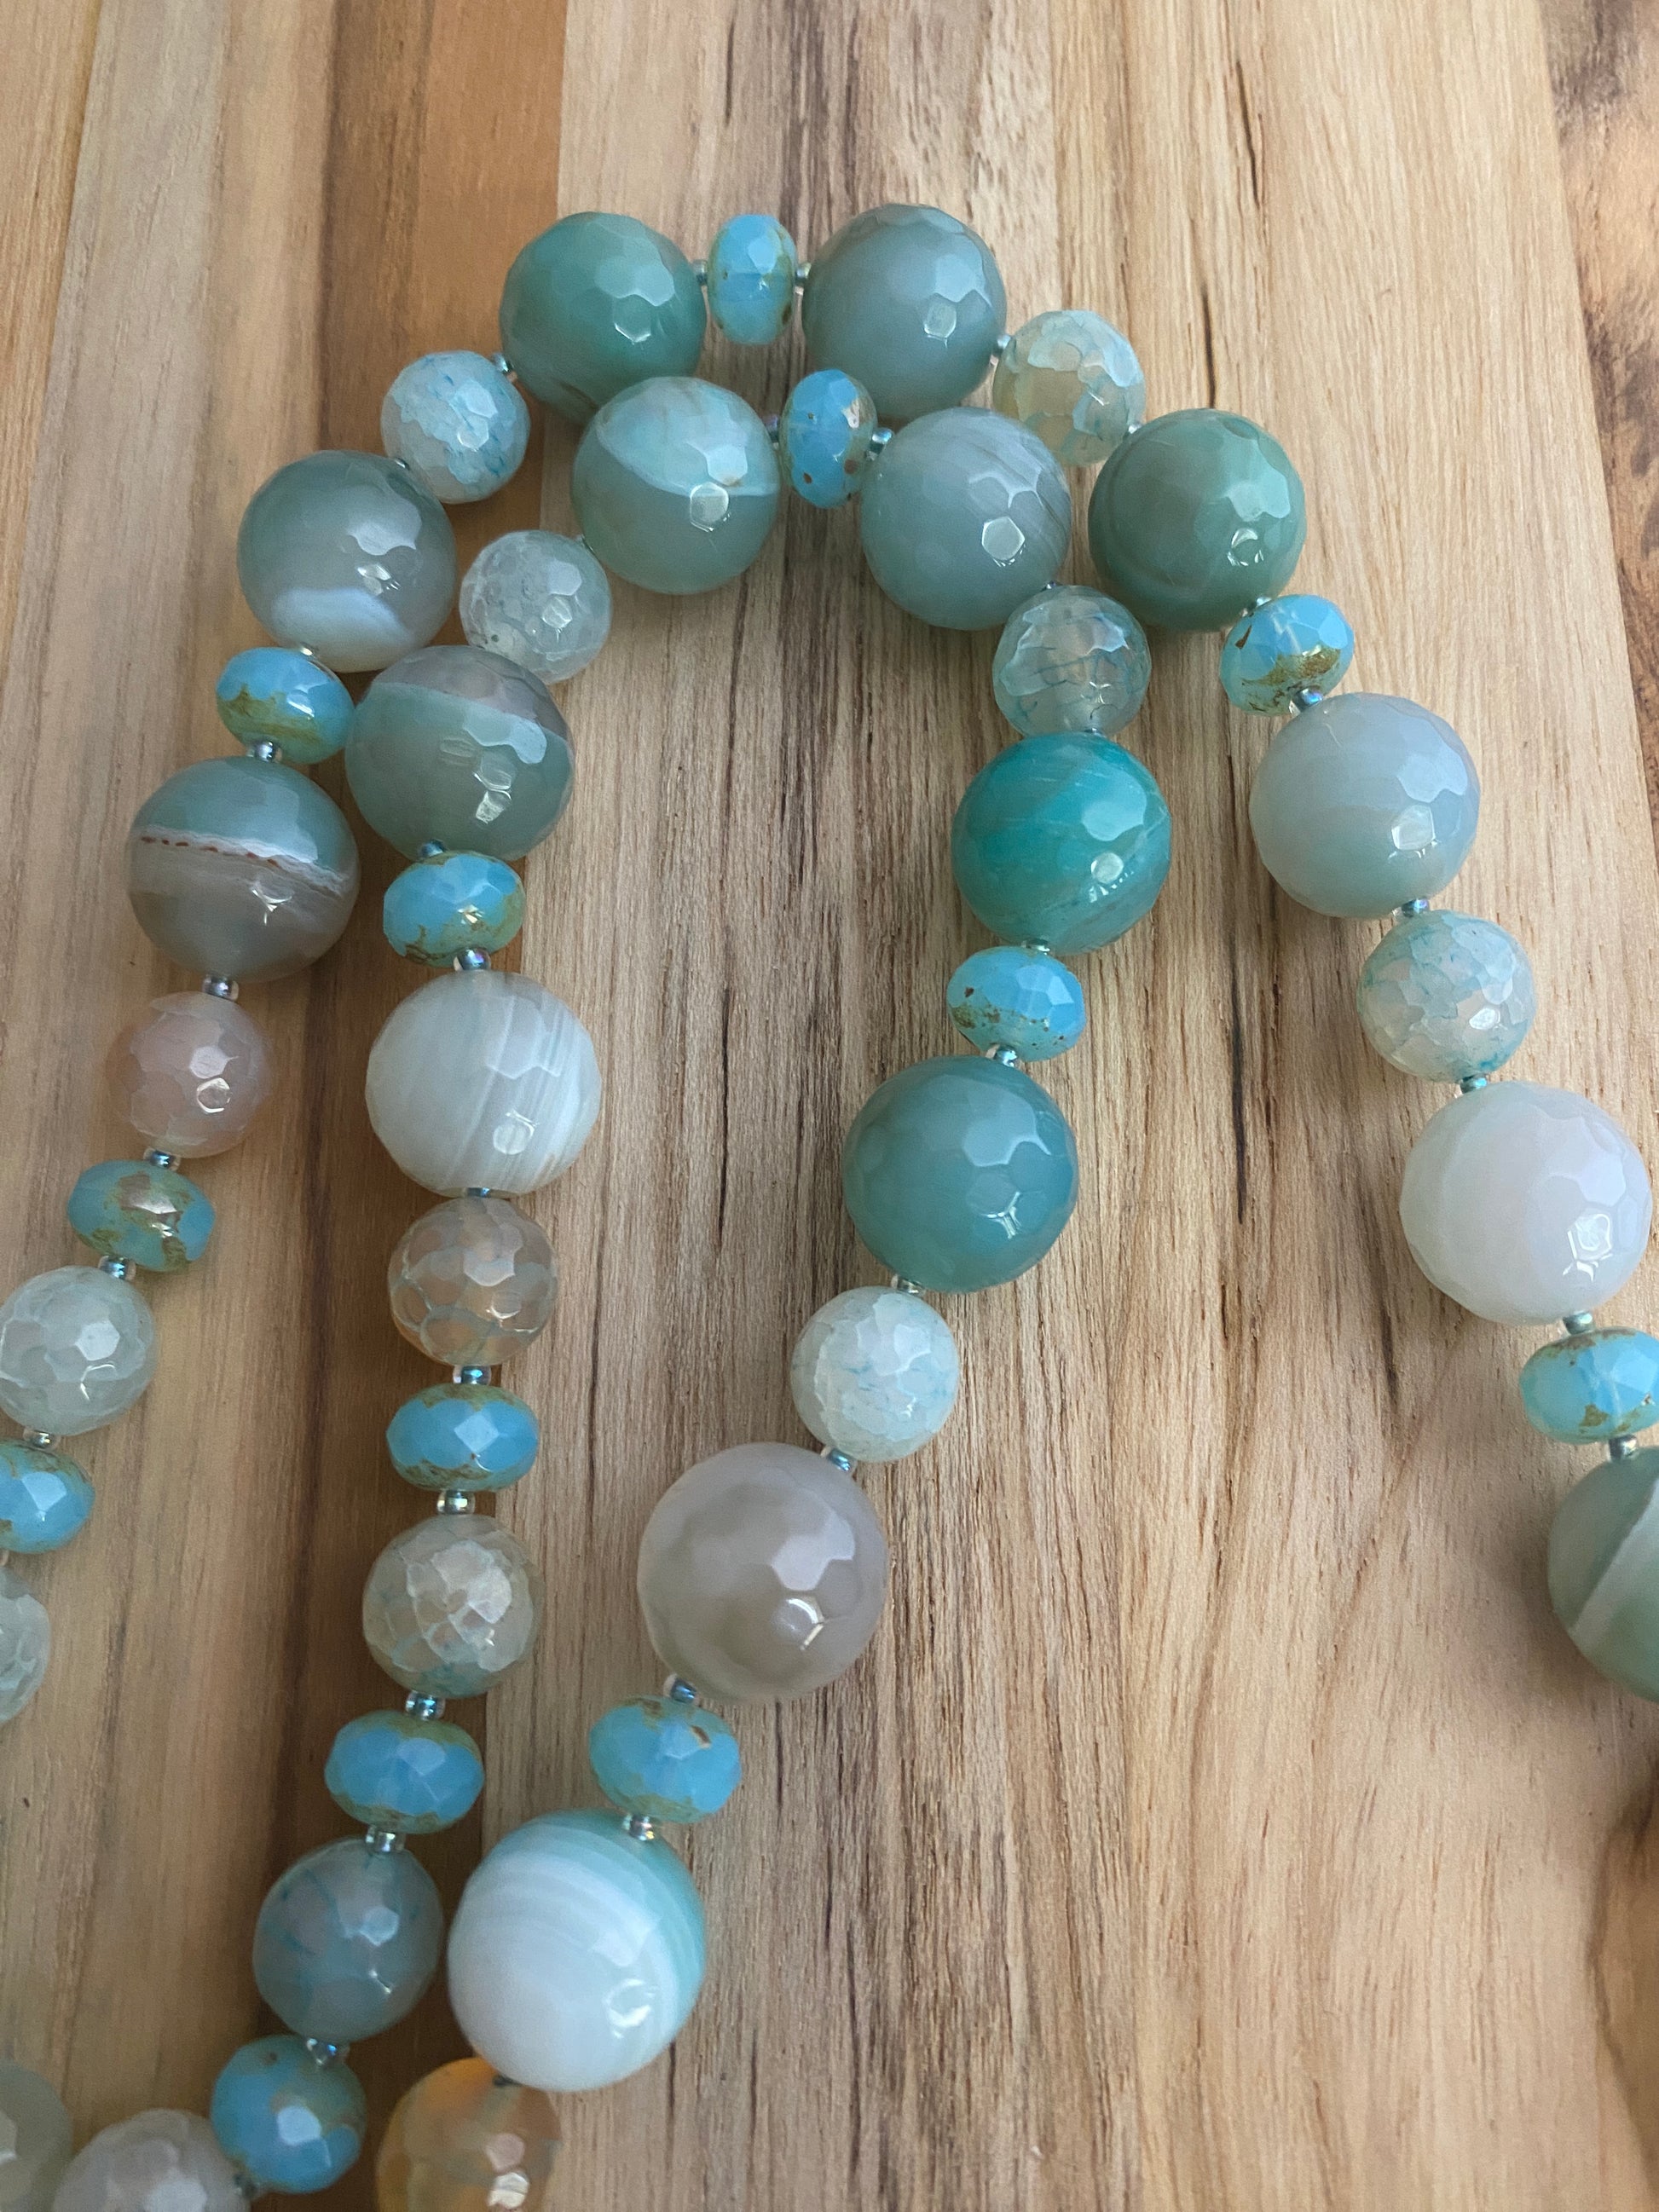 29" Long Aqua Blue Agate Beaded Necklace with Glass Beads - My Urban Gems